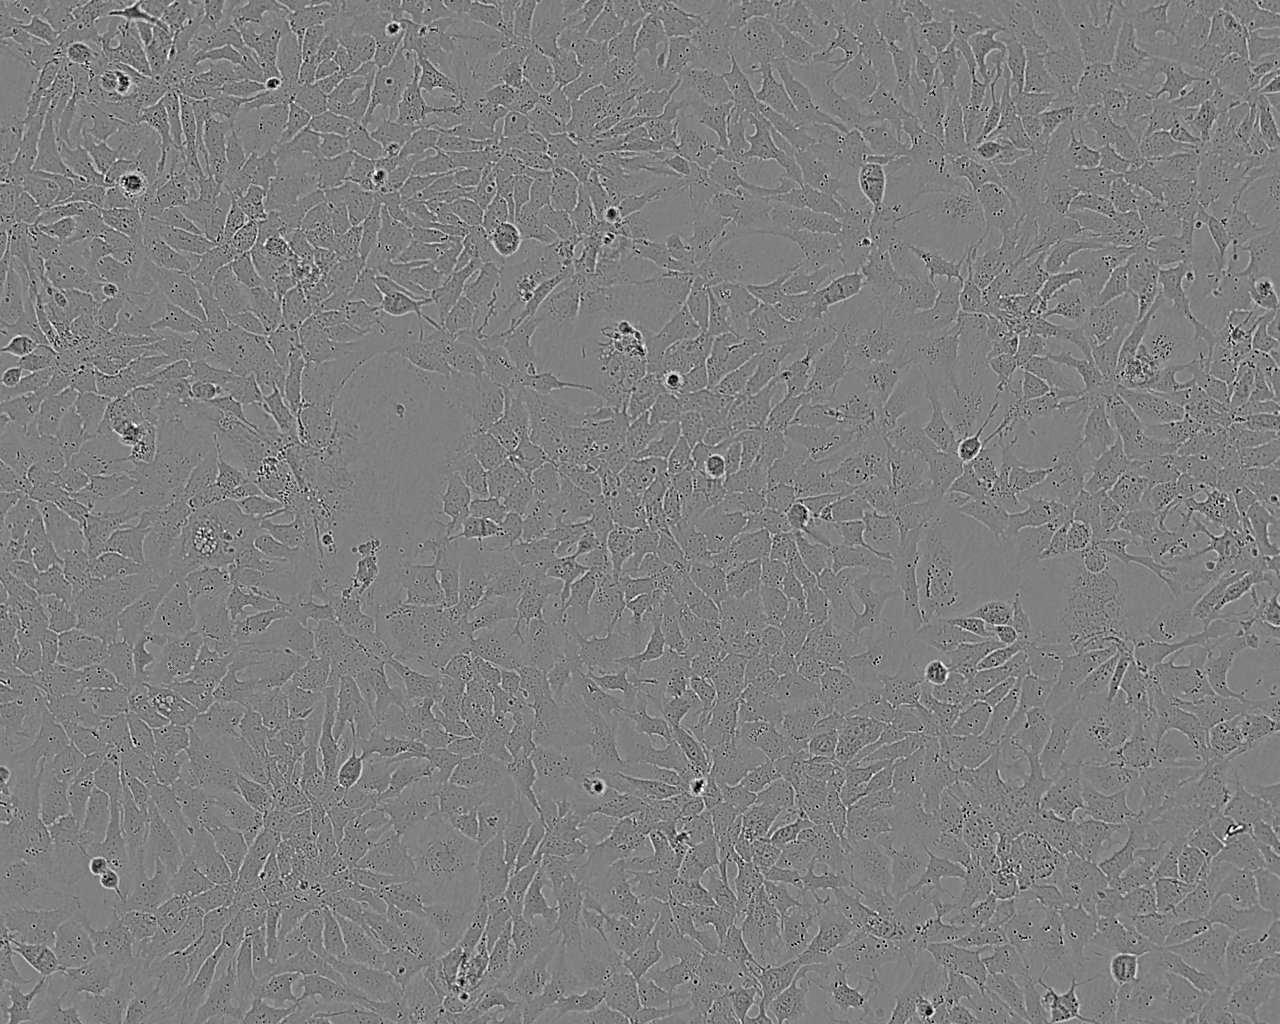 MM96L epithelioid cells人黑色素瘤细胞系,MM96L epithelioid cells